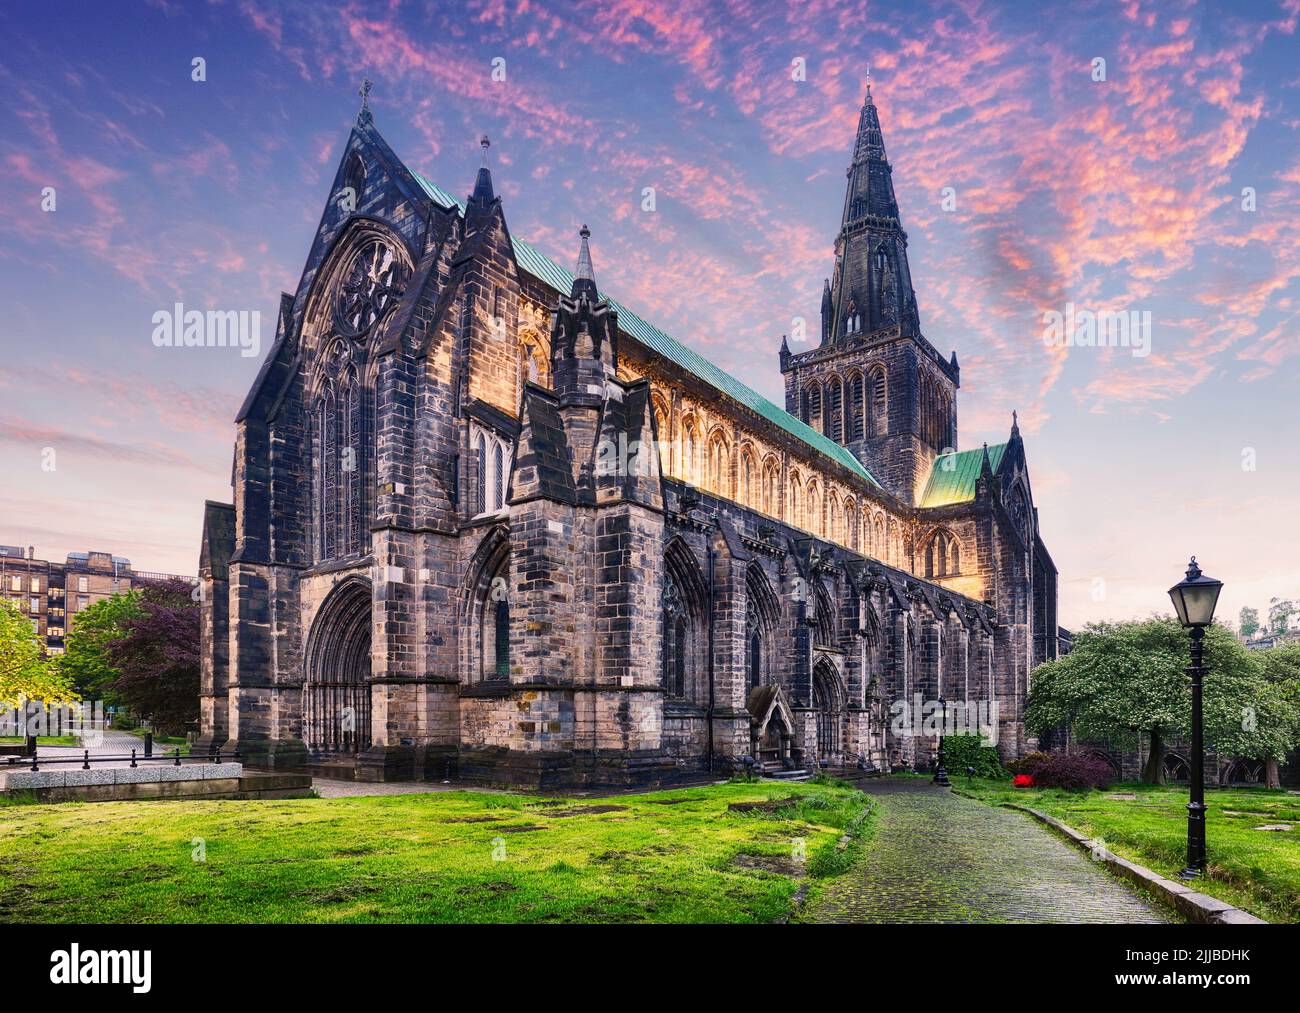 Glasgow Cathedral (Scottish Gaelic: Cathair-eaglais Ghlaschu), also called the High Kirk of Glasgow or St Kentigern's or St Mungo's Cathedral, in Glas Stock Photo